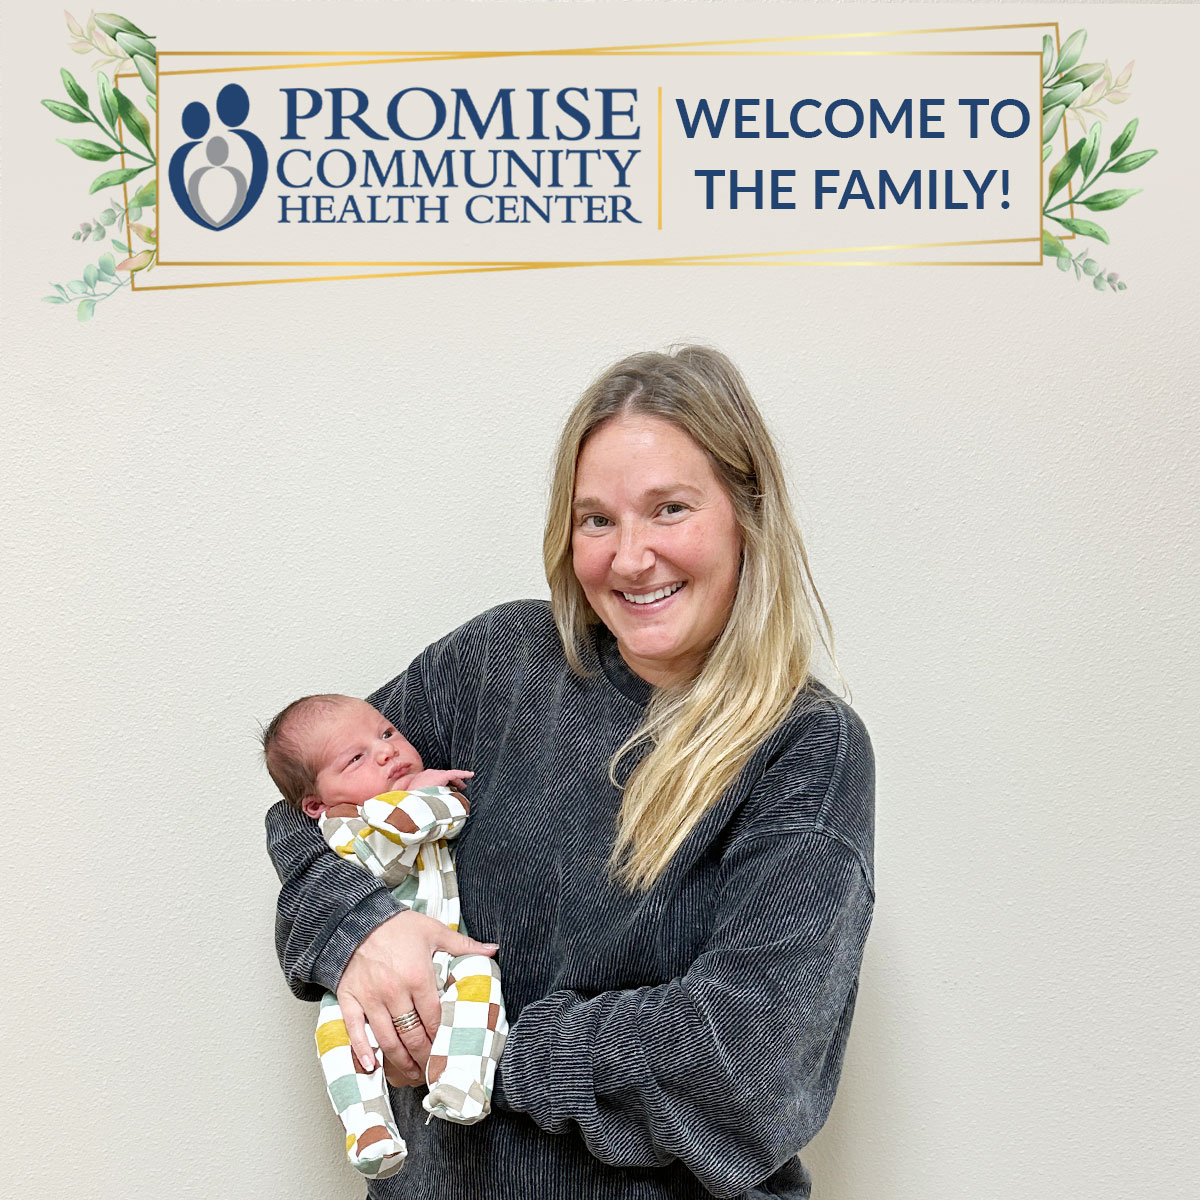 Home birth in Paullina, Iowa | Promise Community Health Center in Sioux Center, Iowa | Midwives in northwest Iowa, Midwives in southeast South Dakota, Midwives in southwest Minnesota | Midwives in Sioux Falls South Dakota, Midwives in Beresford South Dakota, Midwives in Sioux City IA, Midwives in LeMars IA, Midwives in Worthington MN, Midwives in Iowa, Midwives in South Dakota, Midwives in Minnesota